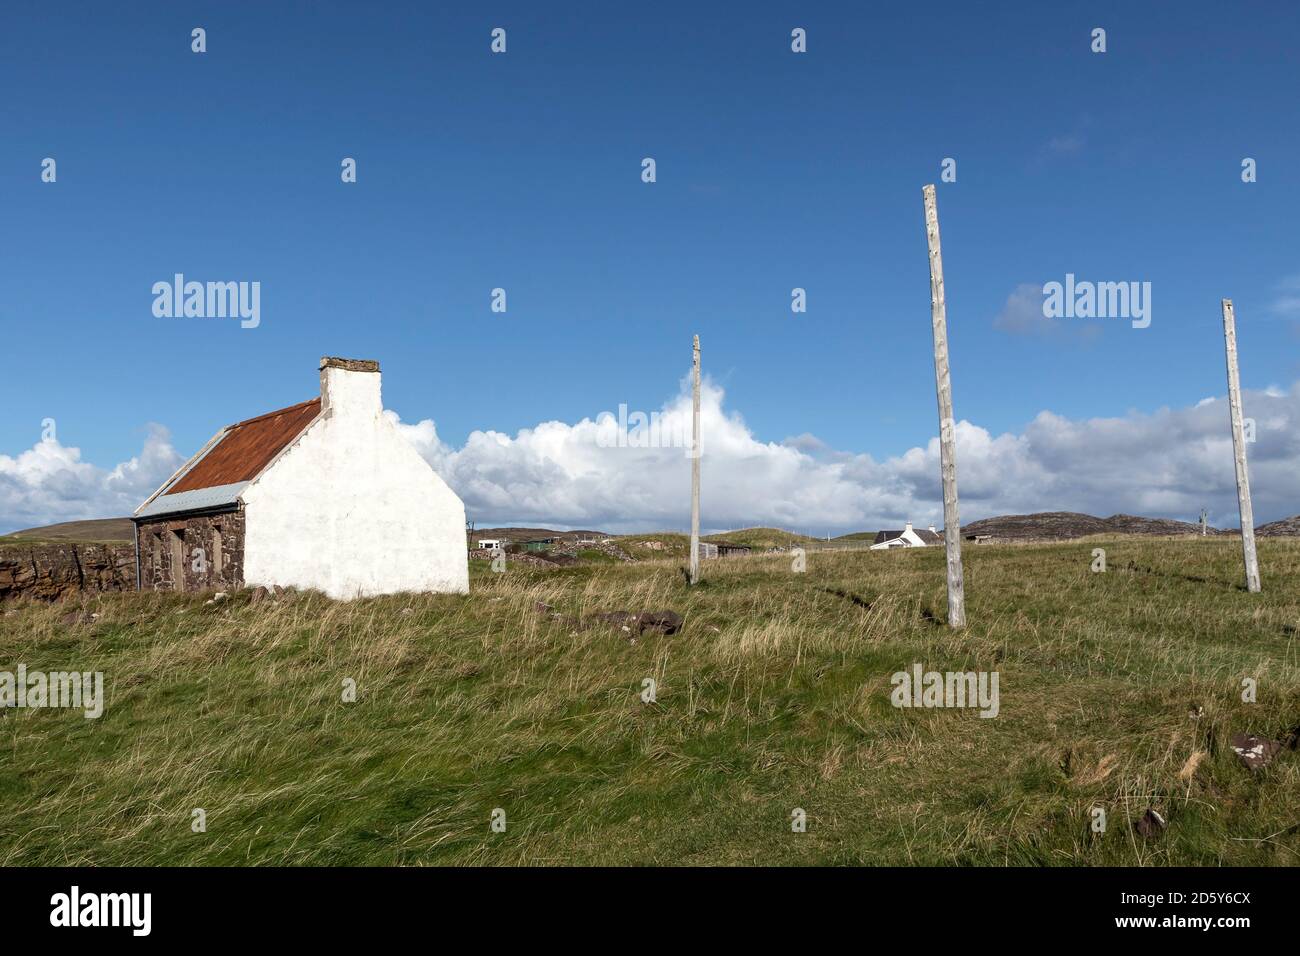 Salmon Fishing Bothy with Net Drying Posts, Clachtoll, Assynt, NW Highlands, Scotland, UK Stock Photo